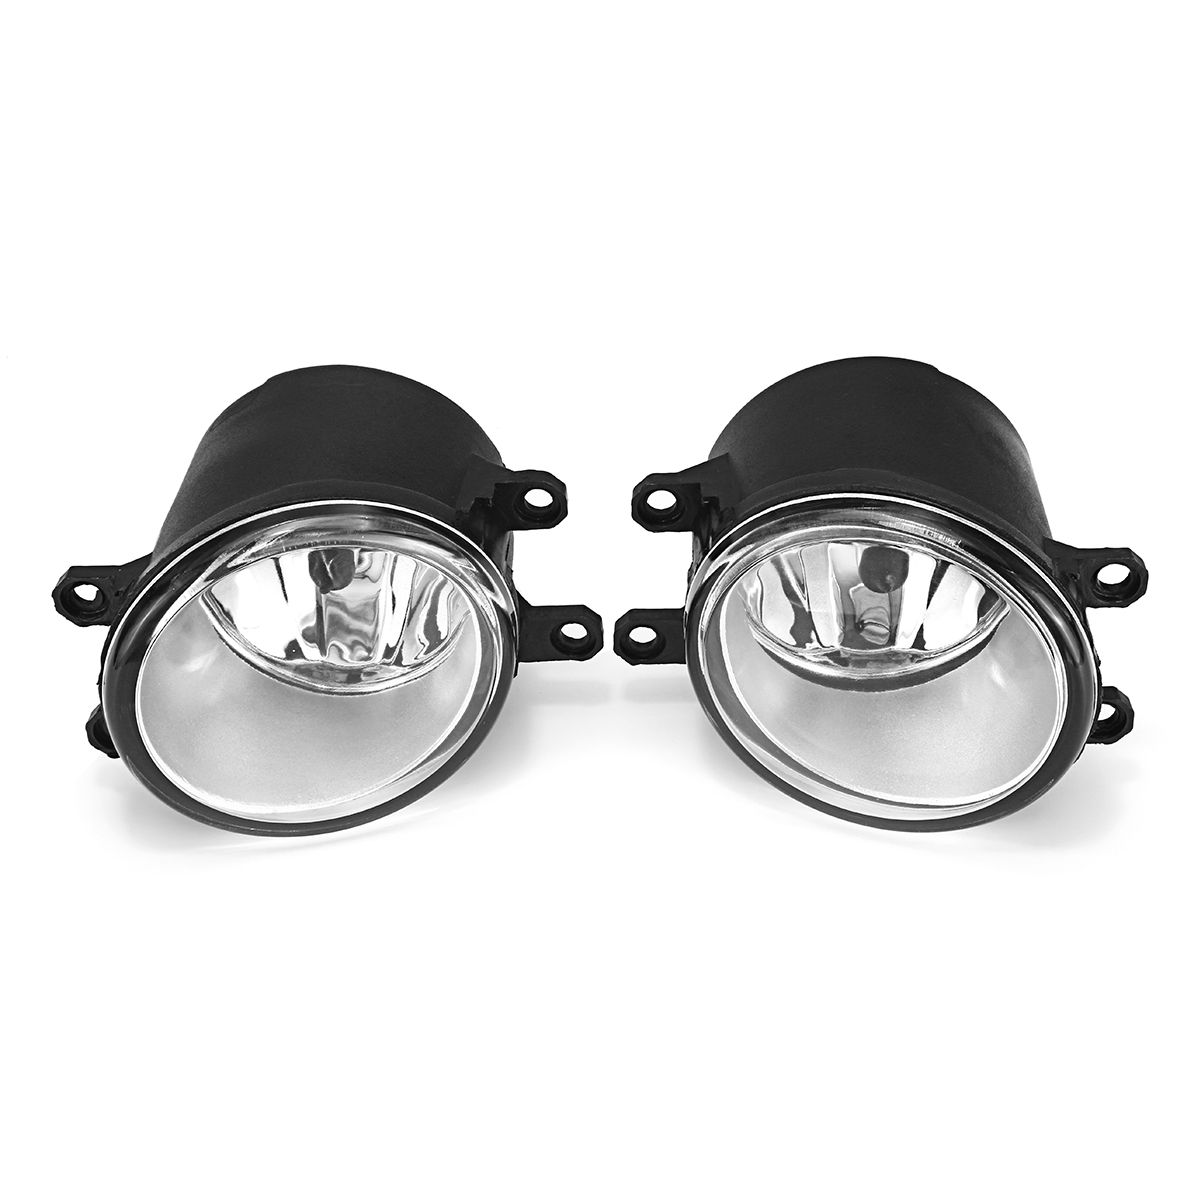 Car-Front-Bumper-Fog-Lights-Pair-with-H11-Bulbs-Amber-for-LexusToyota-8122153290-1406774